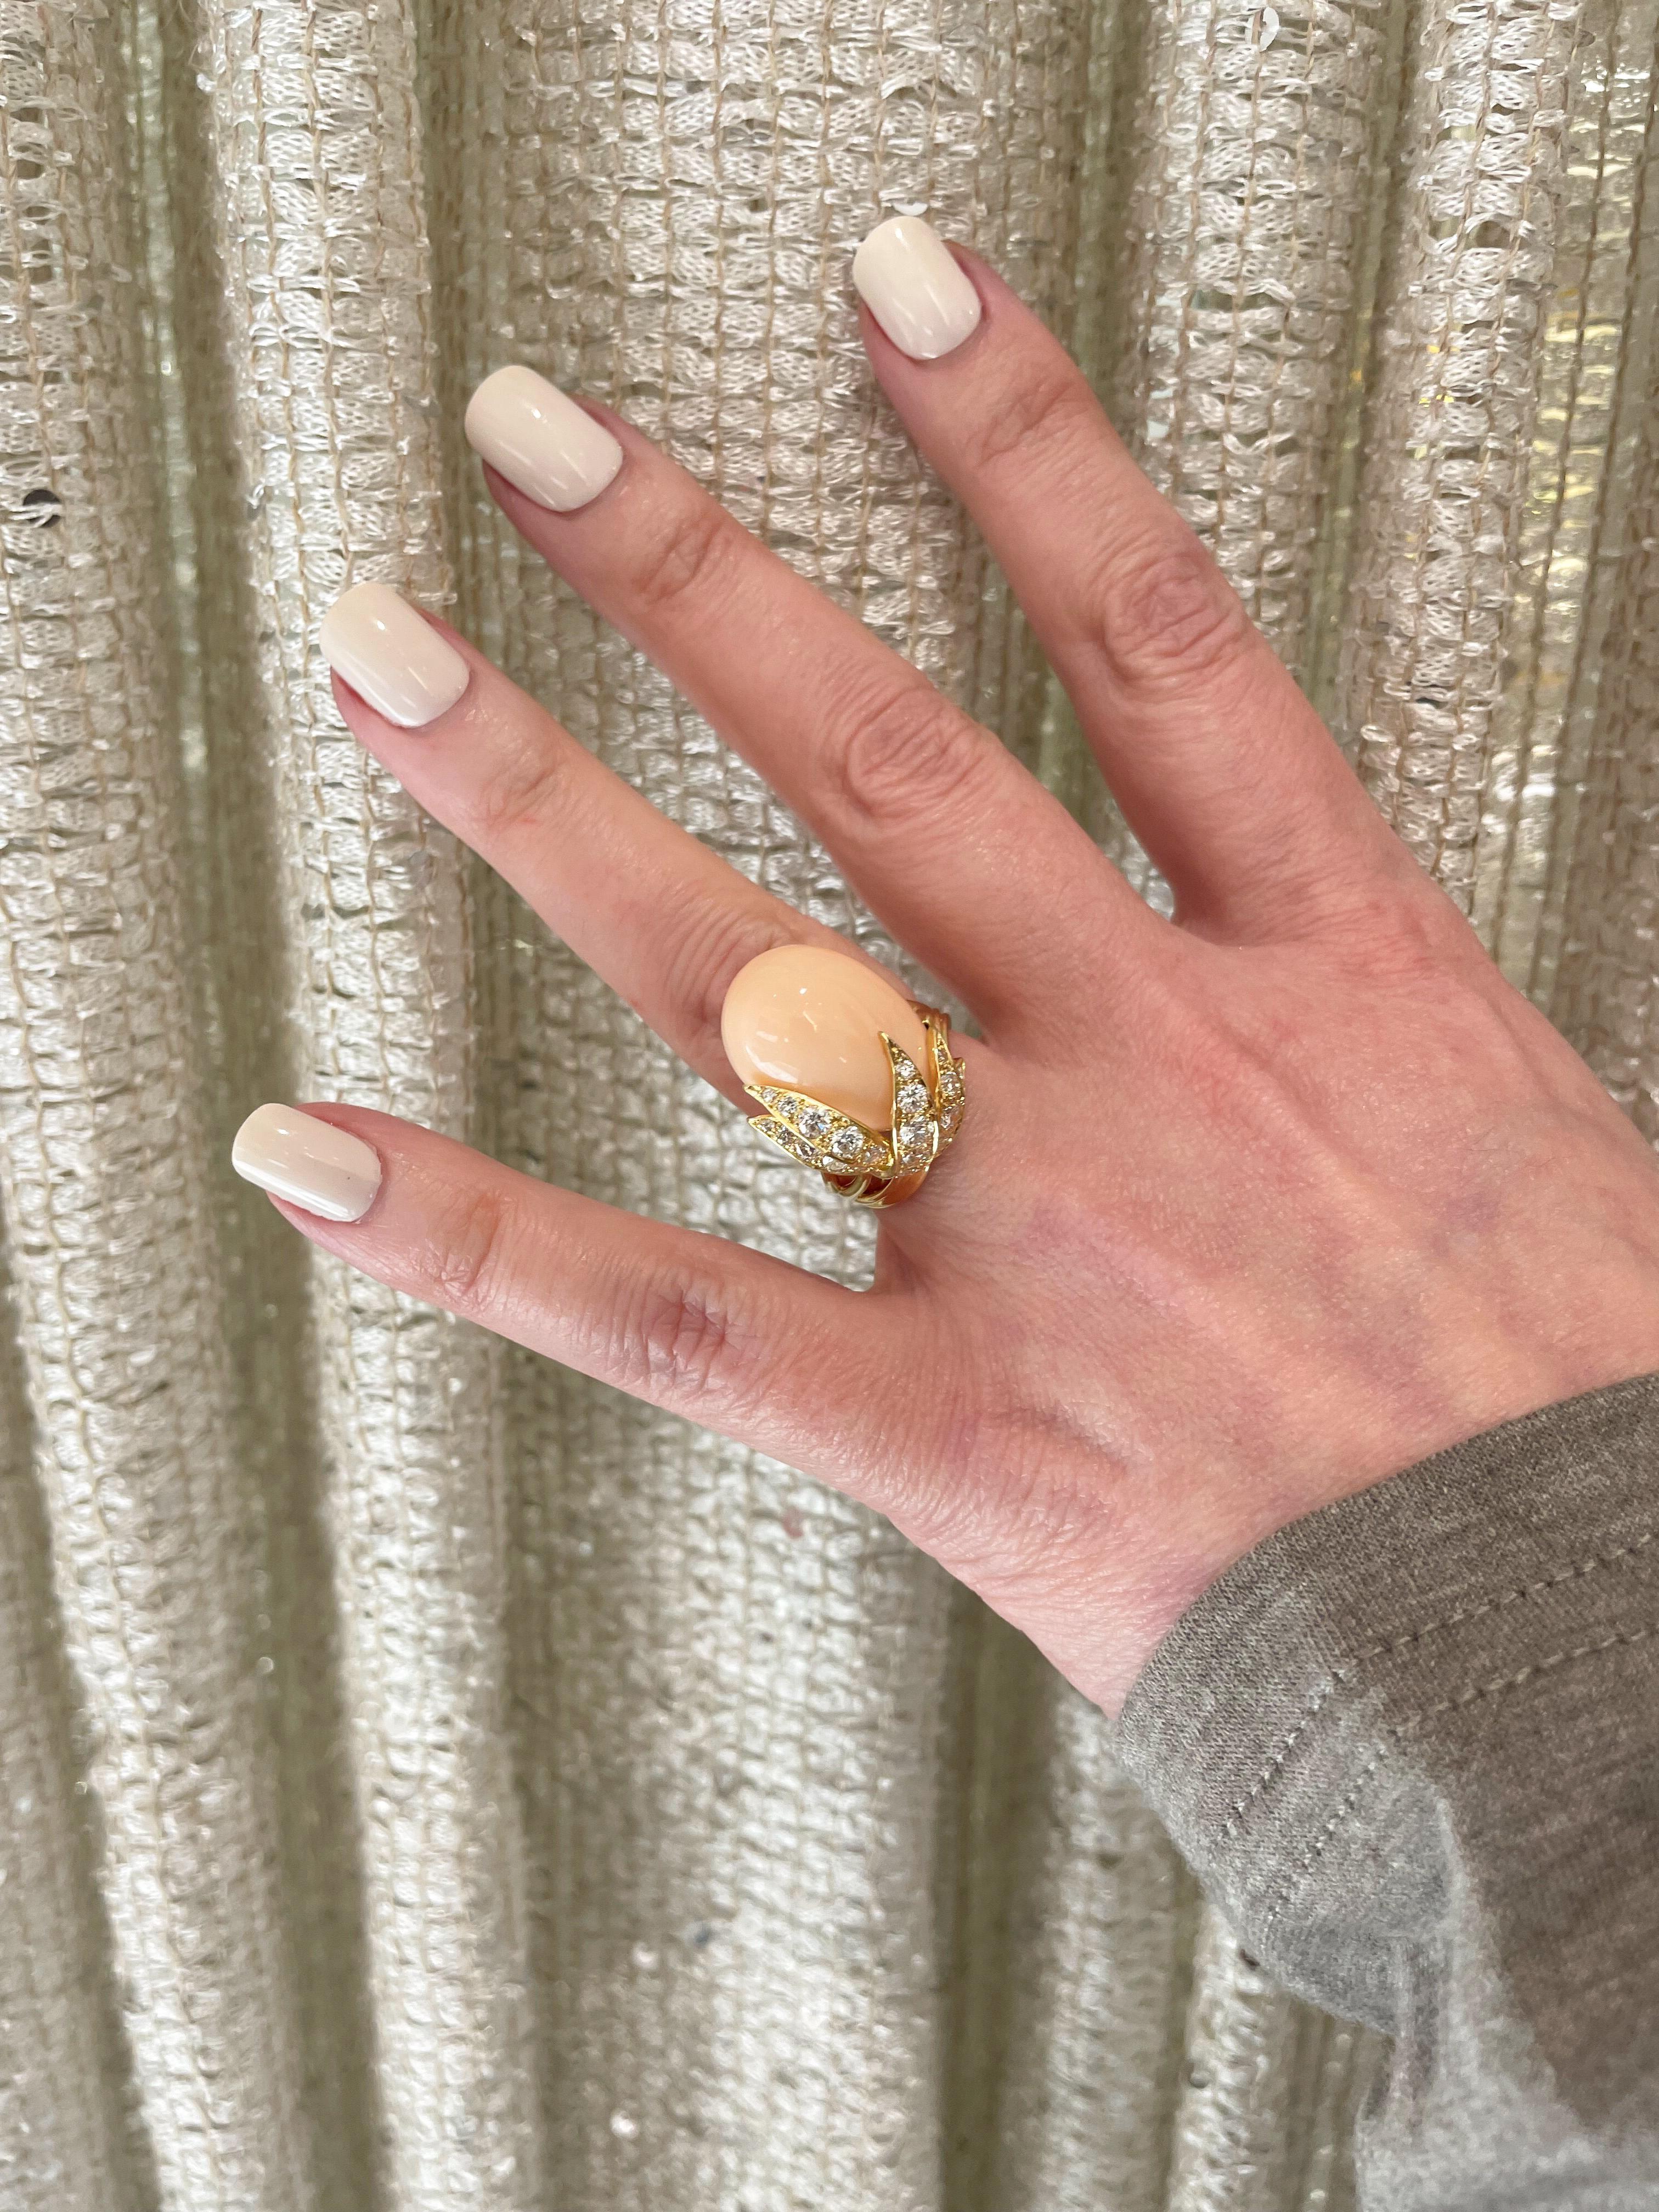 From the Eiseman Estate collection, circa 1970’s, 18 karat yellow gold angel skin coral ring. This ring is crafted with an egg shaped angel skin coral accented with yellow gold leaves. This ring also features 25 round brilliant cut diamonds with an